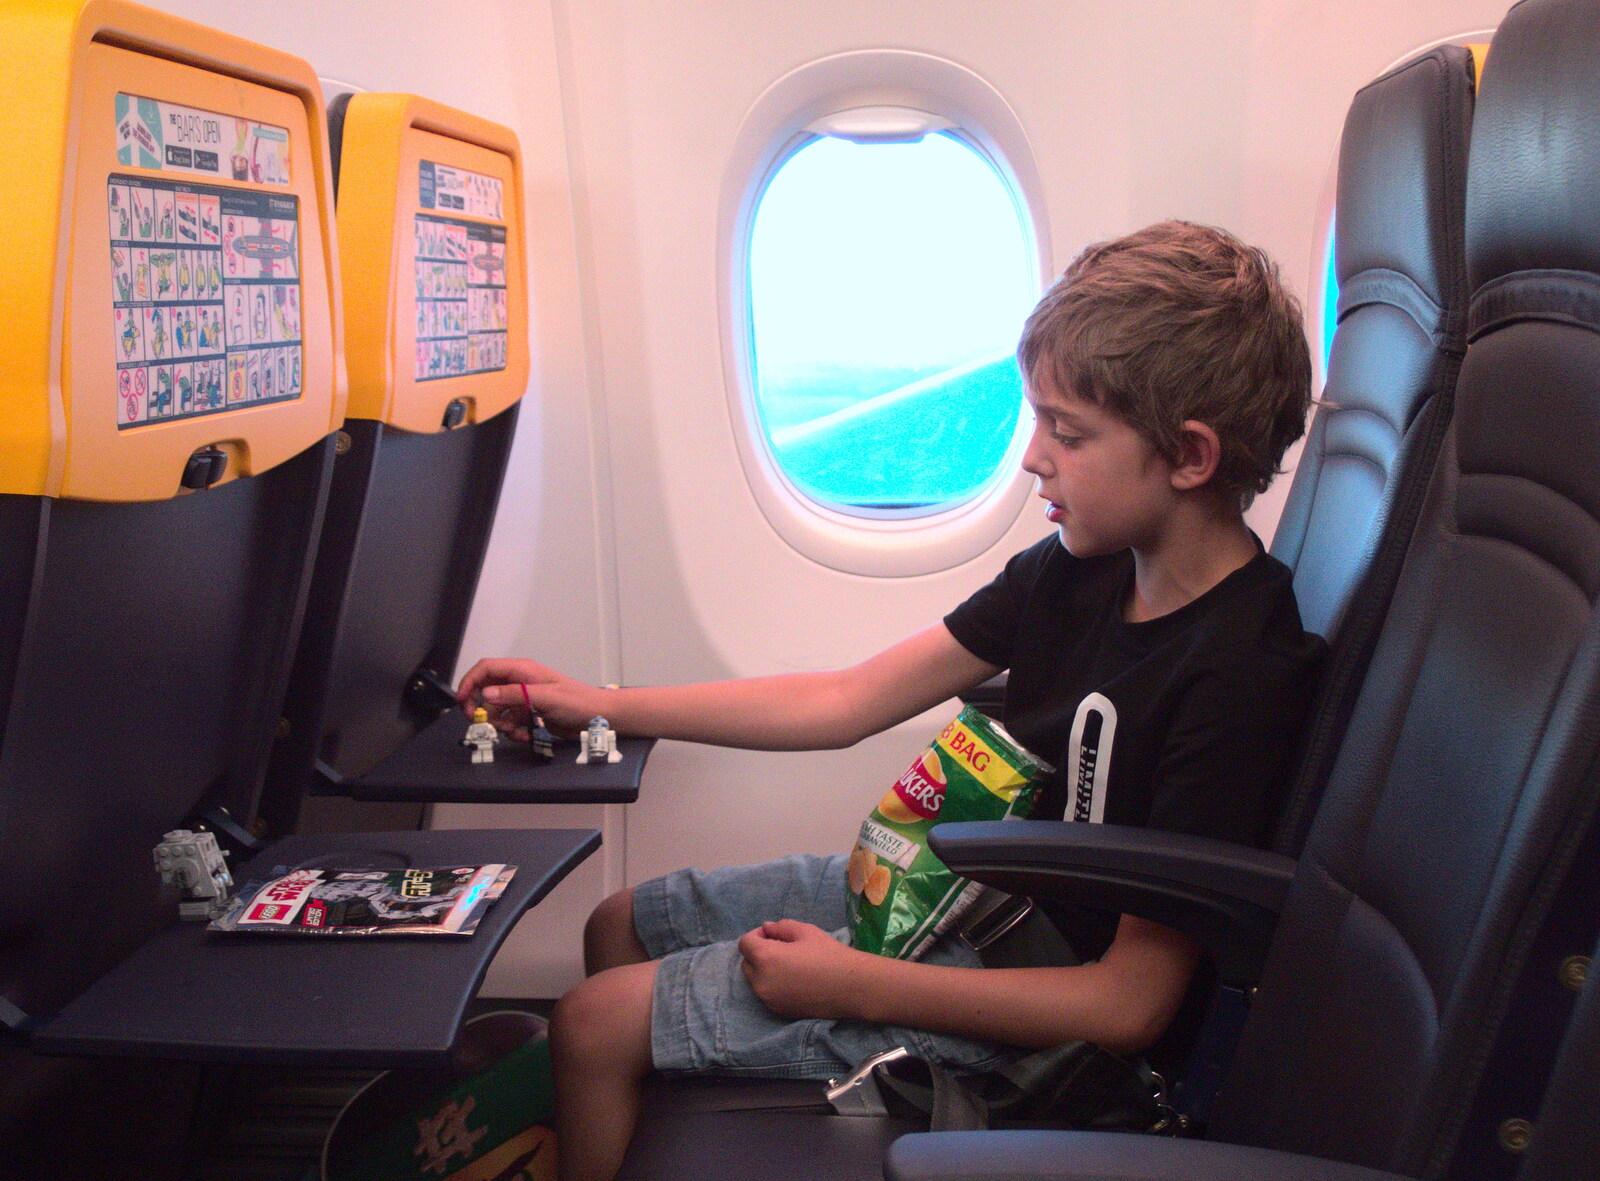 Fred plays with Lego on the plane from A Trip to Da Gorls, Monkstown Farm, County Dublin, Ireland - 4th August 2018